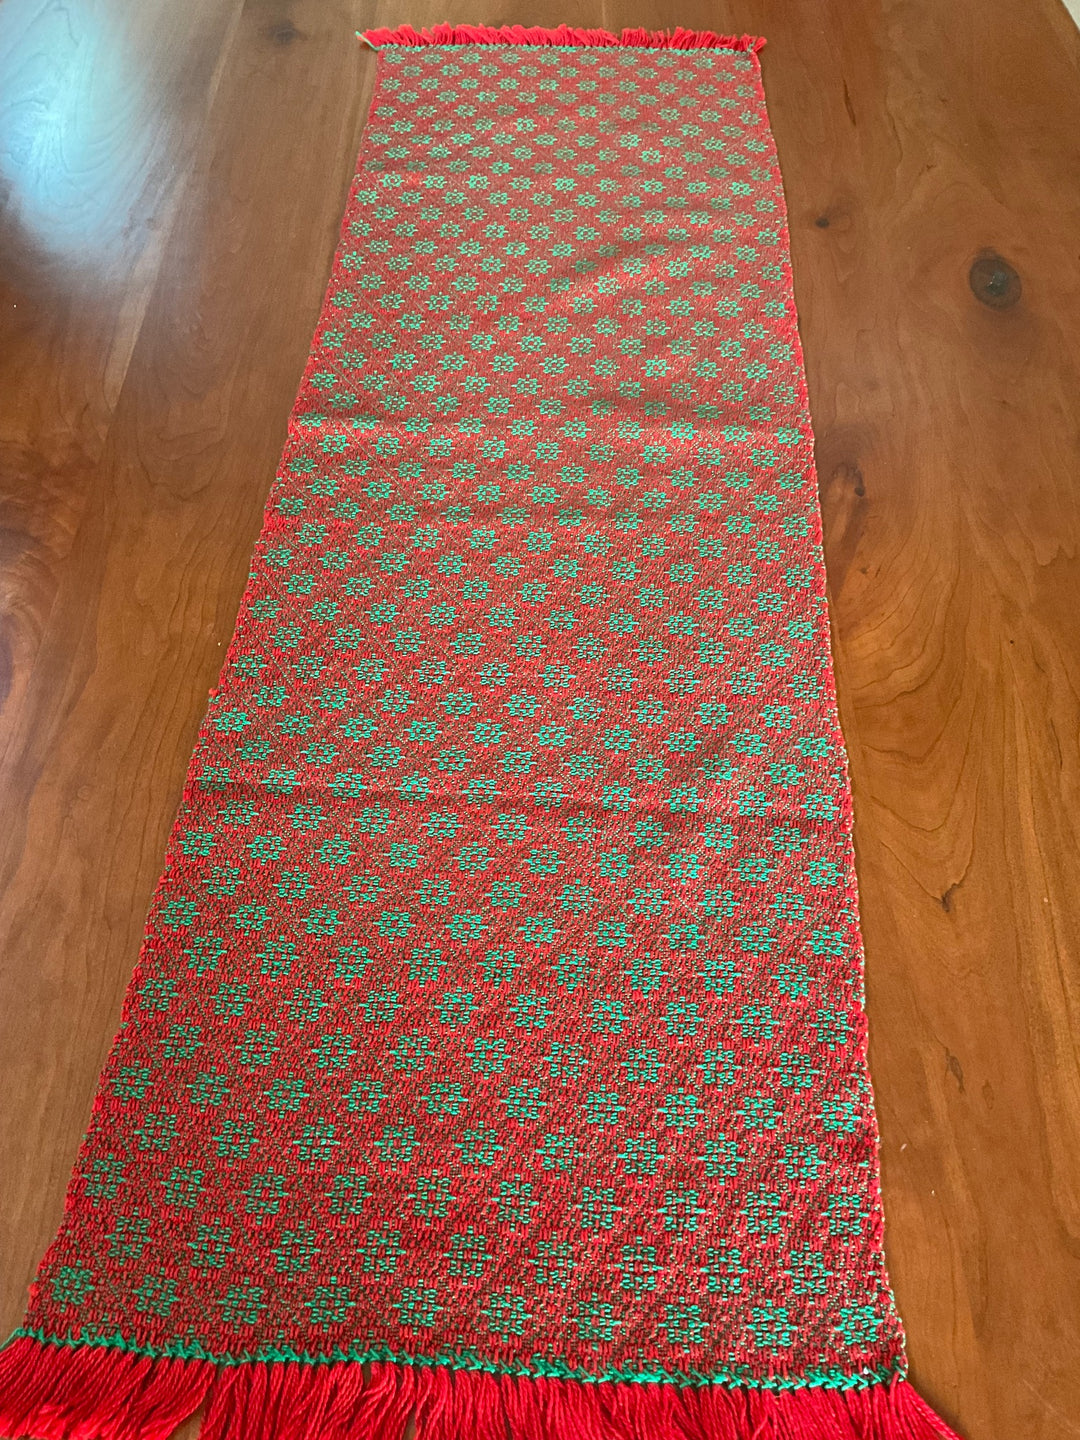 Red and Green Runner